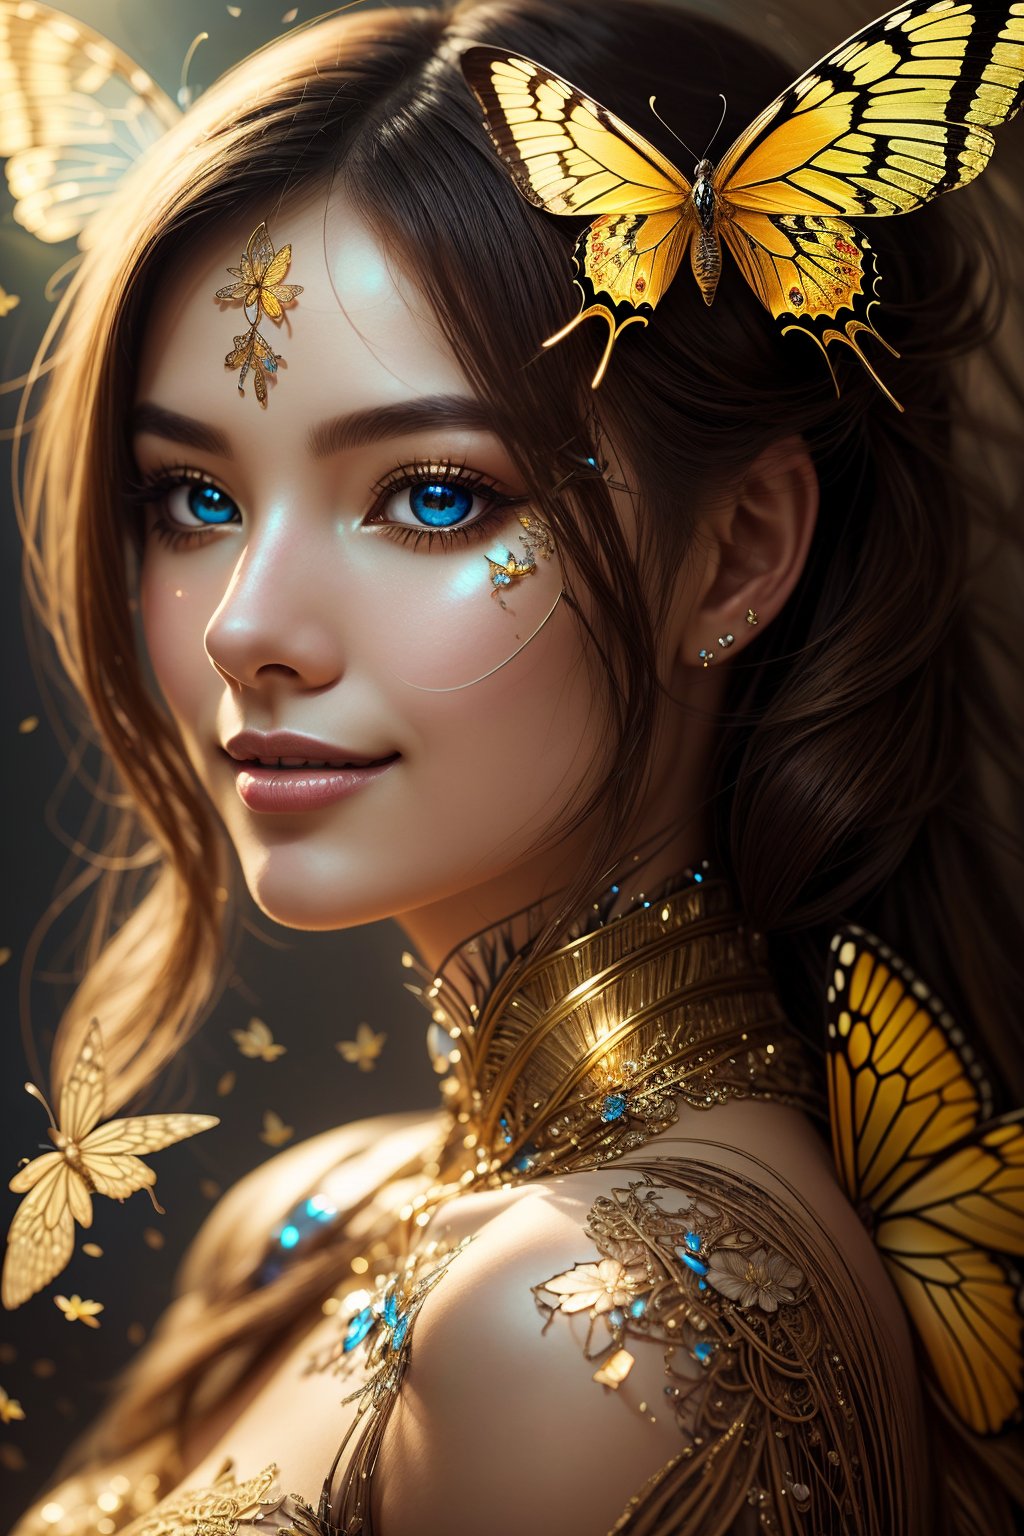 A (highly detailed, elegant) portrait that seamlessly combines elements of digital photography and surreal painting. The subject is a beautiful cyborg with (intricate, majestic) features and brown hair. cute smile, Her cybernetic enhancements are adorned with a (golden butterfly filigree) that adds an element of mystique. The scene is set against a backdrop of (broken glass), creating a unique and captivating blend of beauty and surrealism.